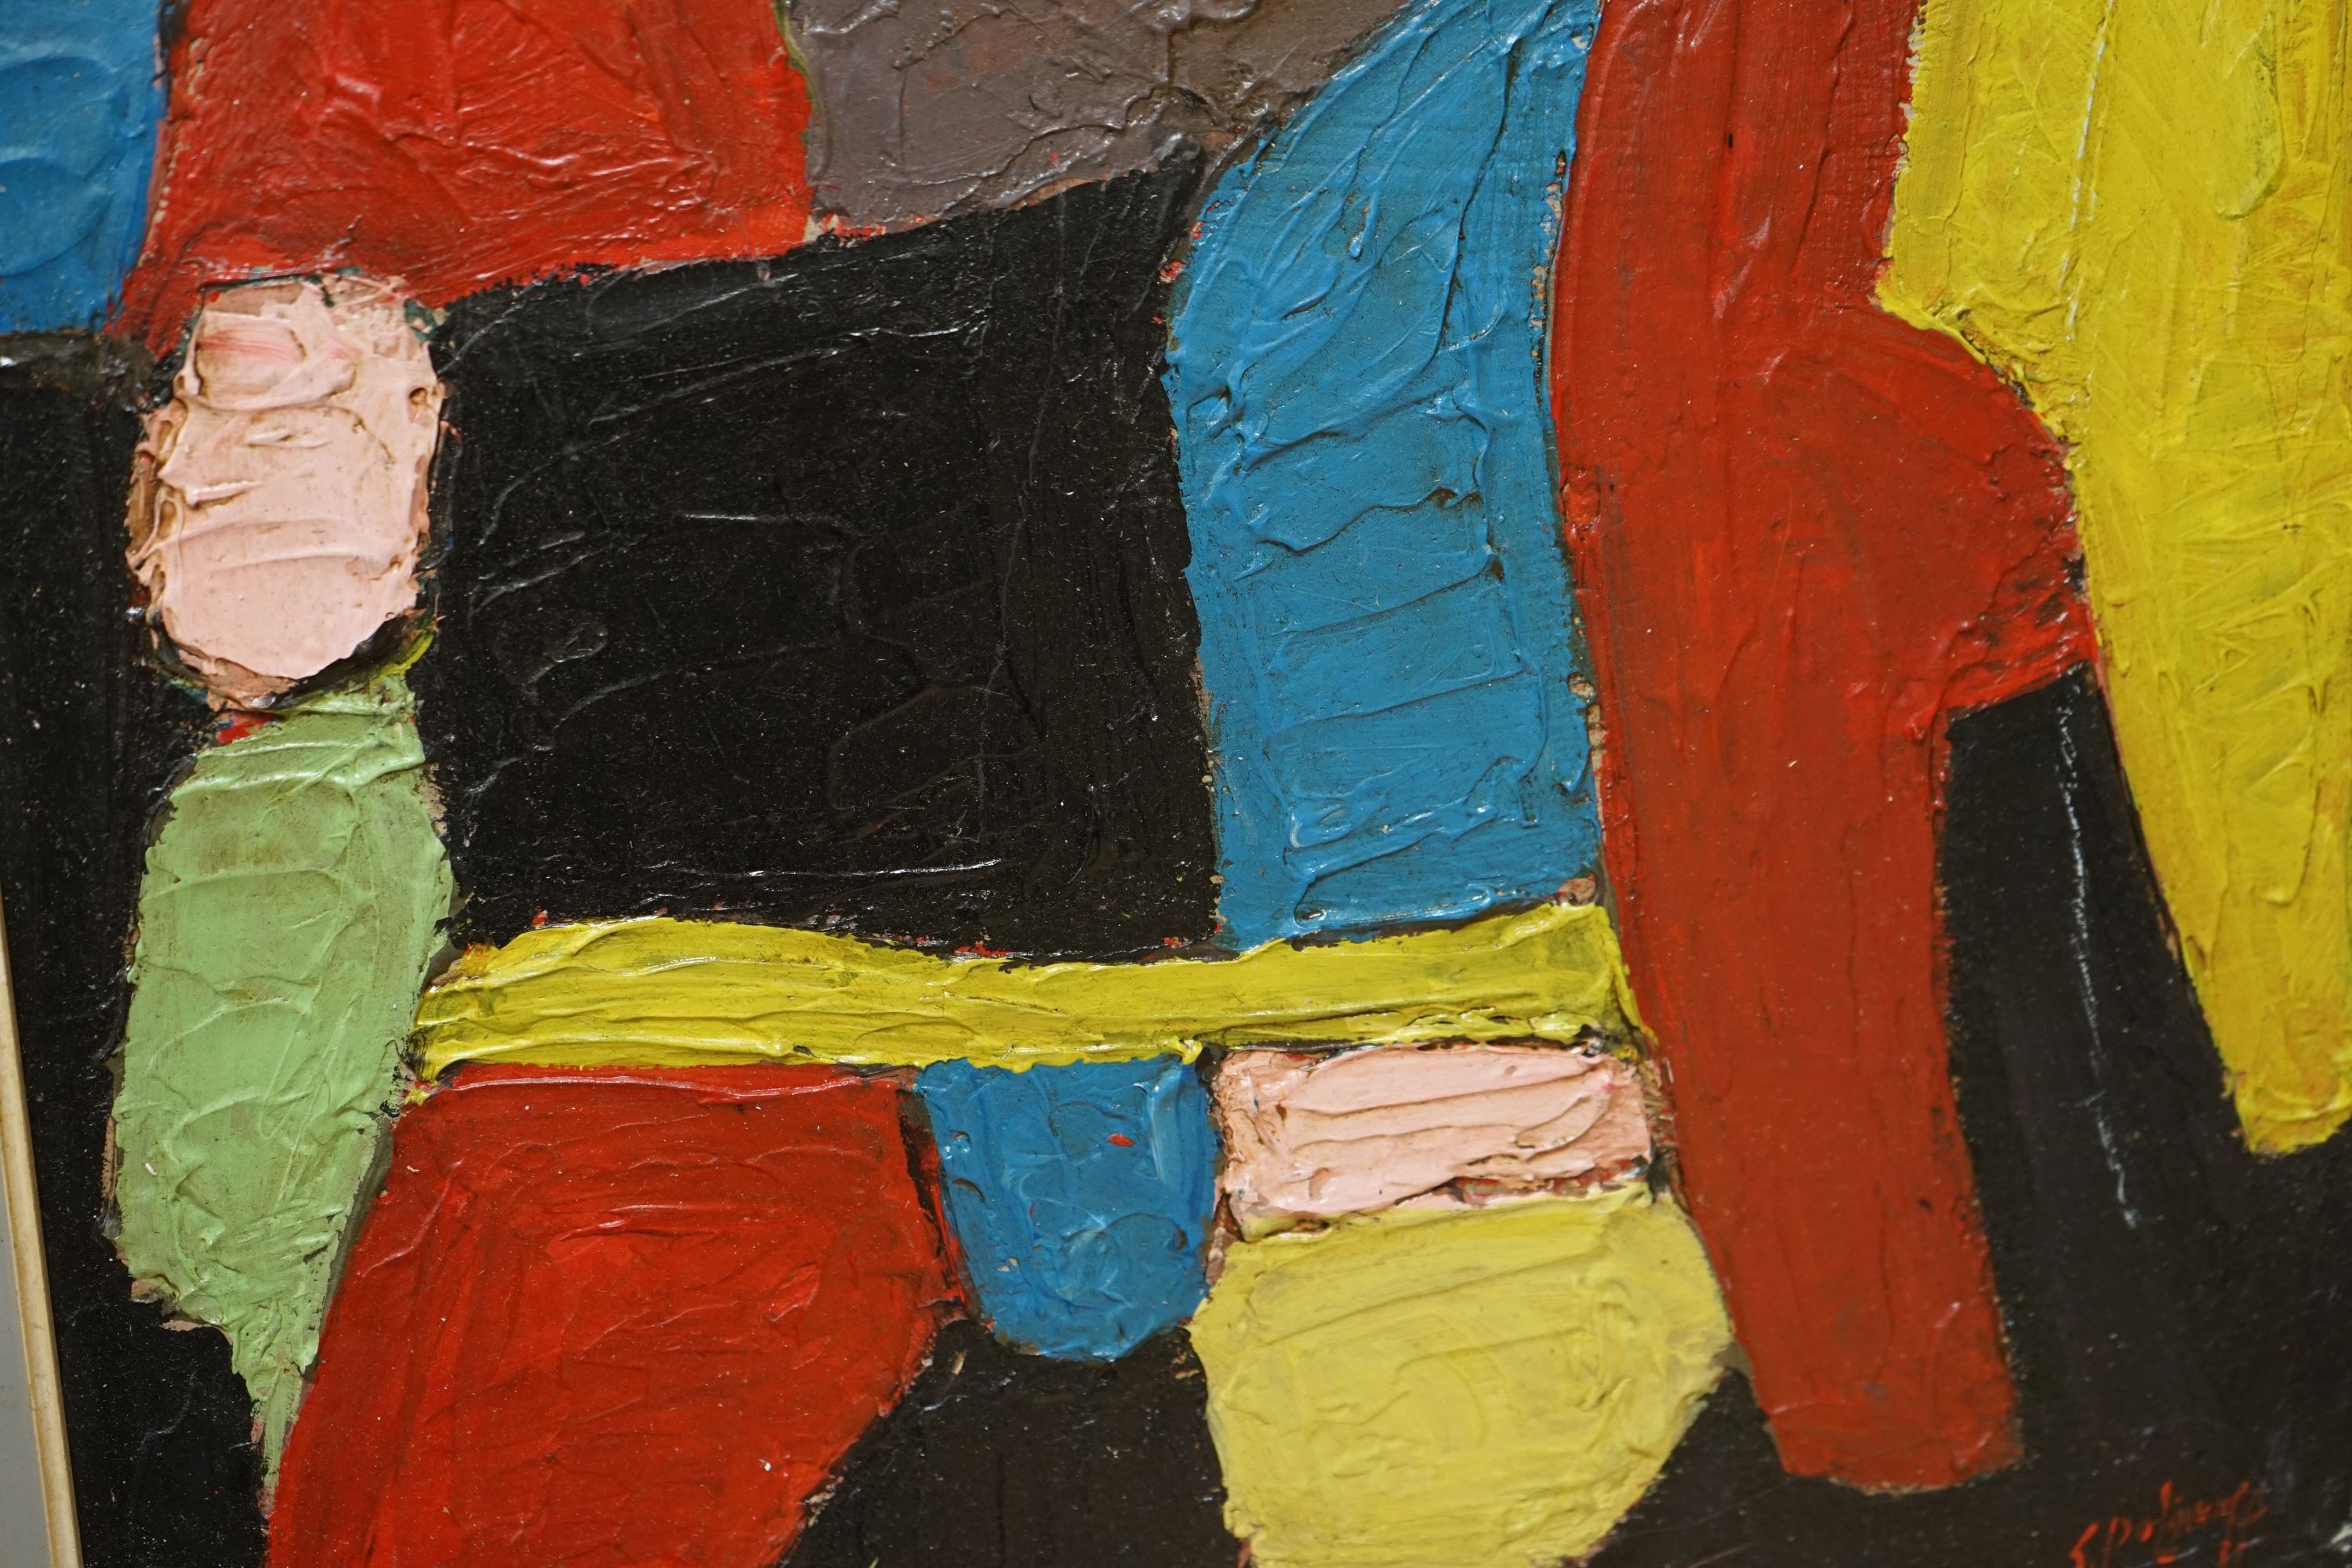 After Serge Poliakoff, oil on board, Untitled, bears signature, 62 x 49cm